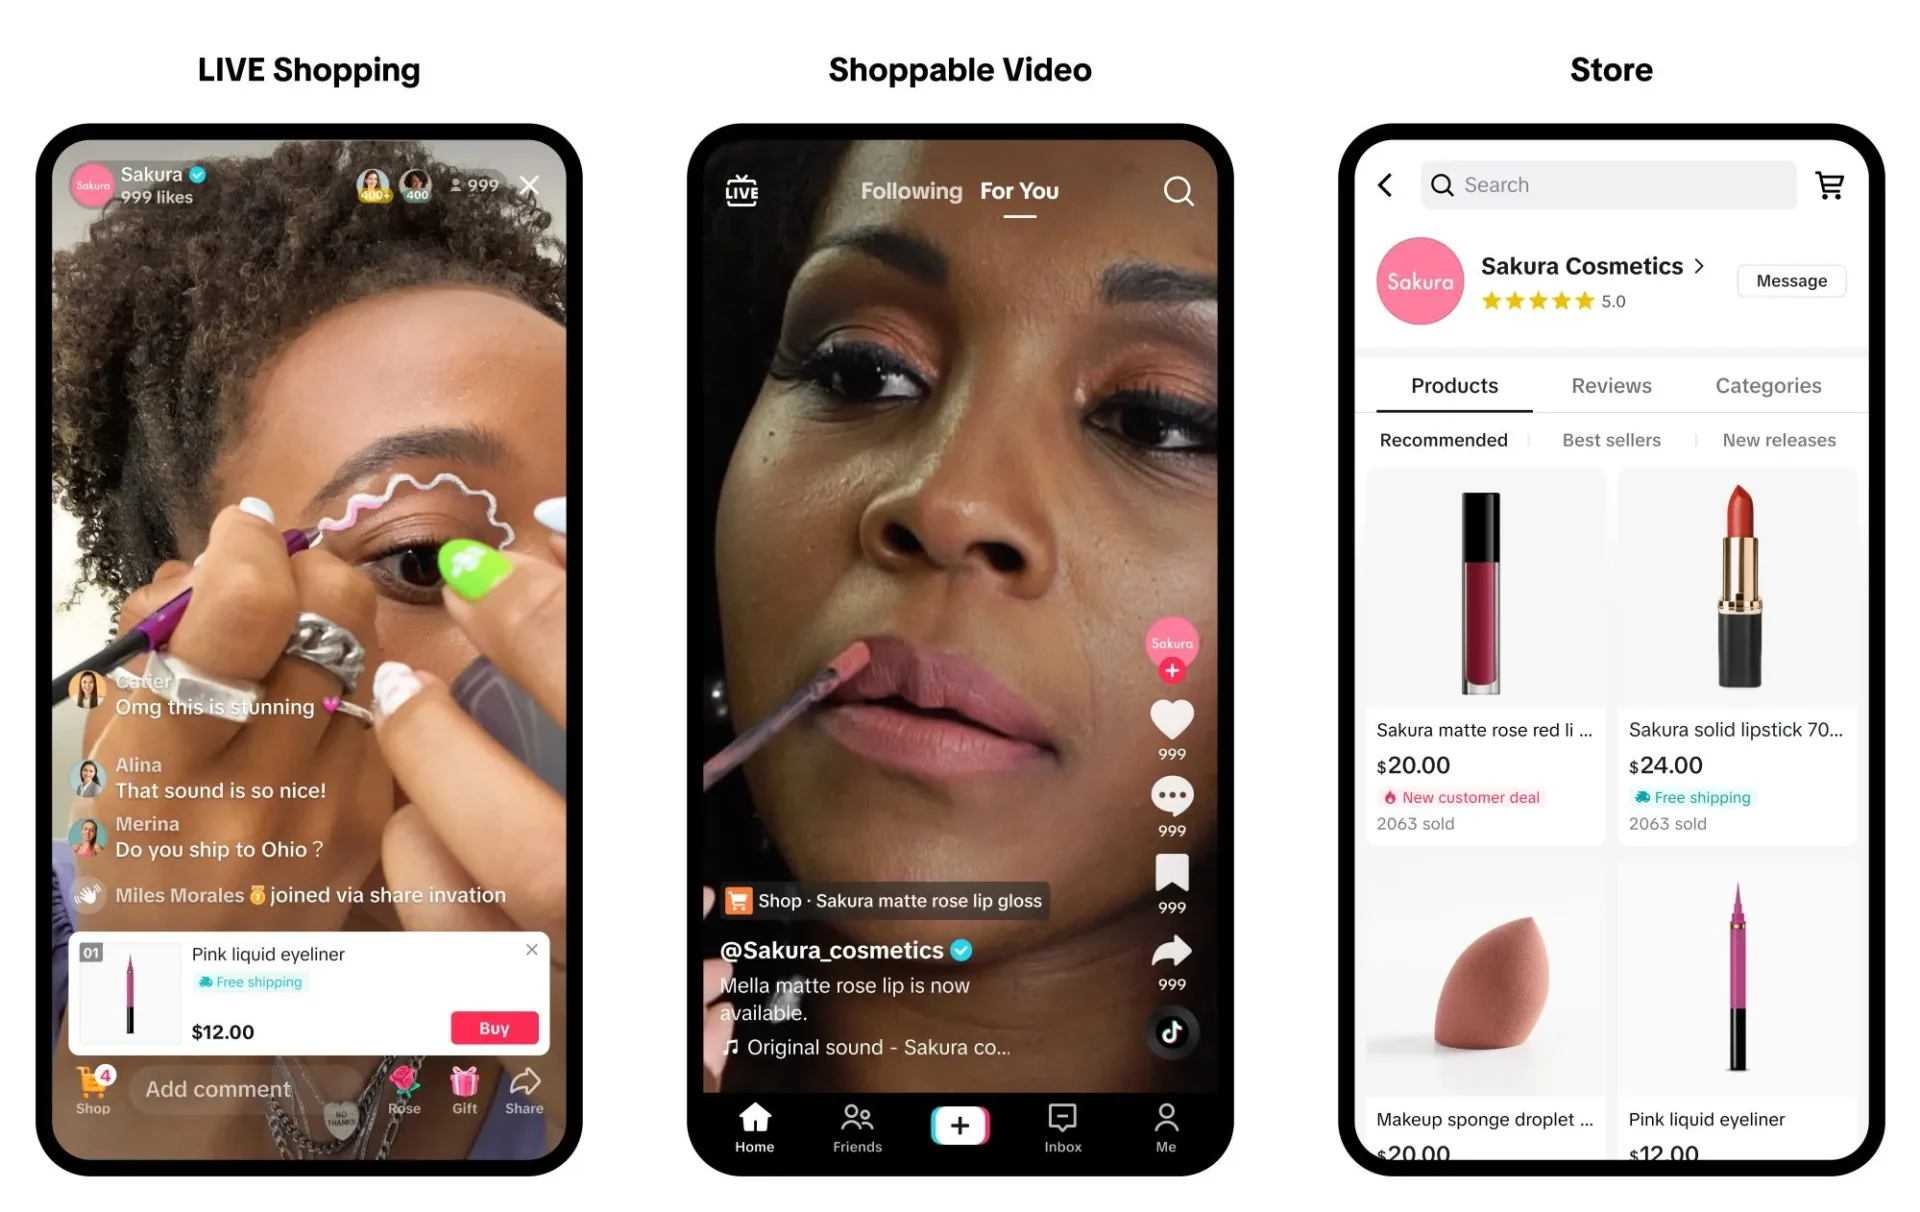 Example of TikTok Shop across three different smartphones and a Black woman doing makeup and makeup products.